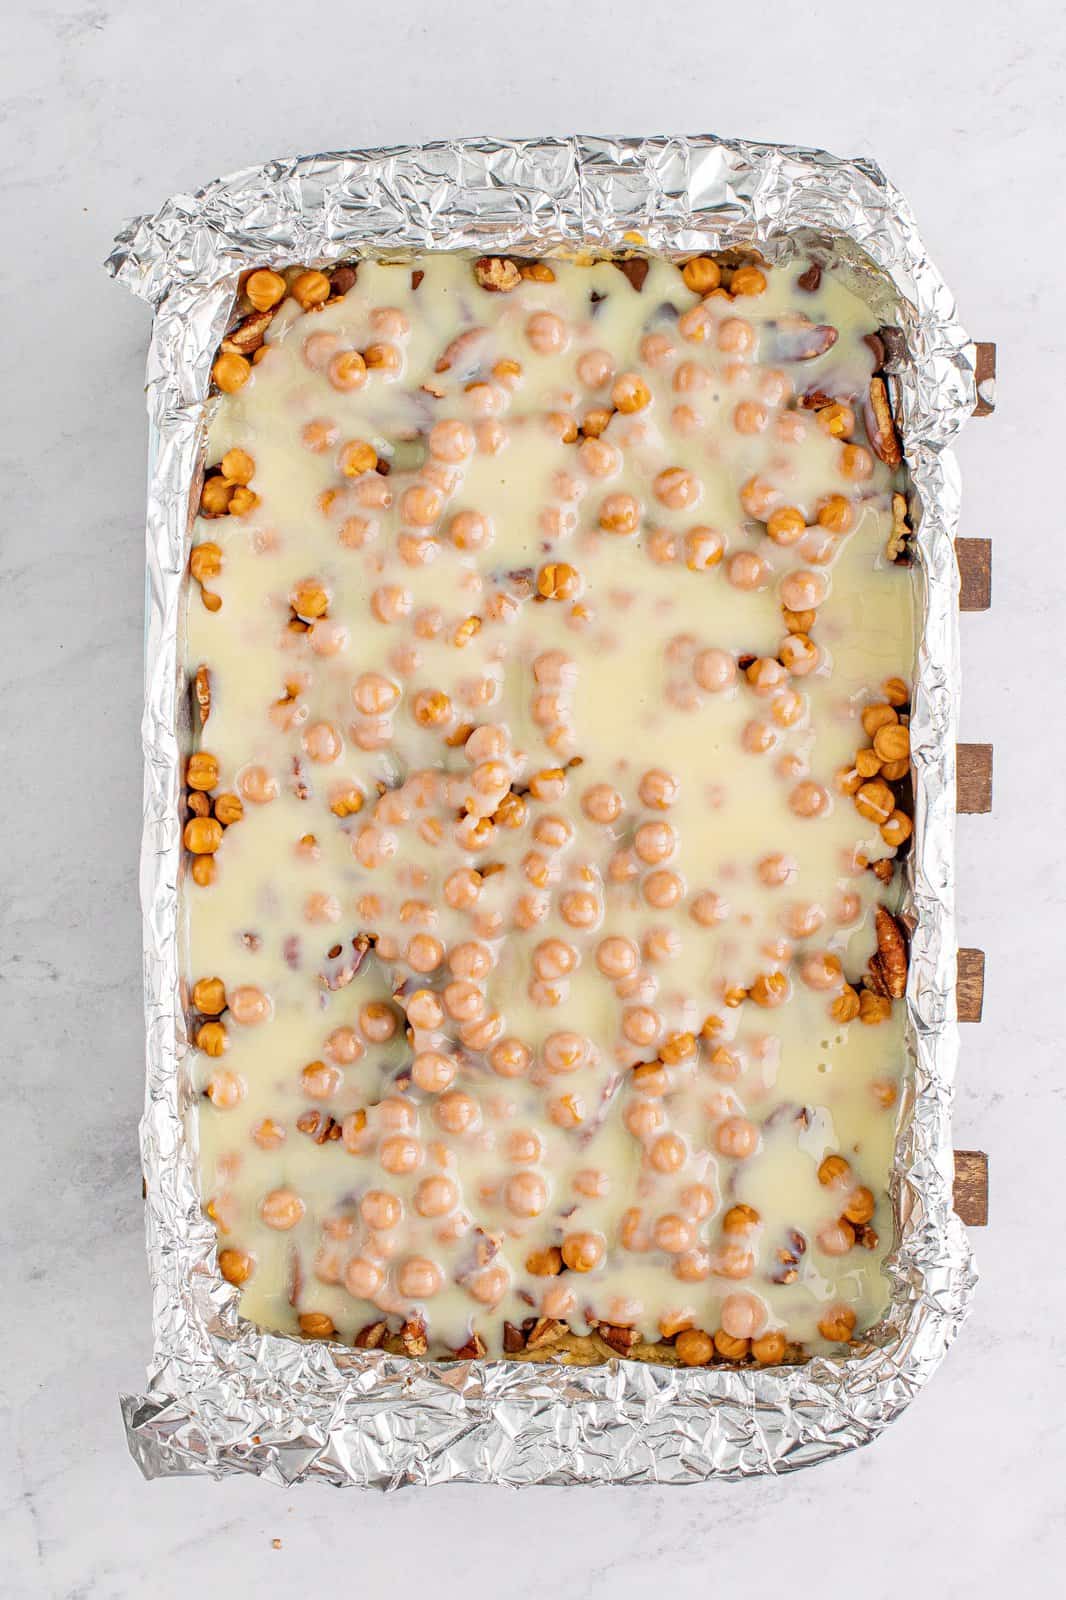 Sweetened condensed milk poured over the top of the chocolate chips, pecans and caramel bits.